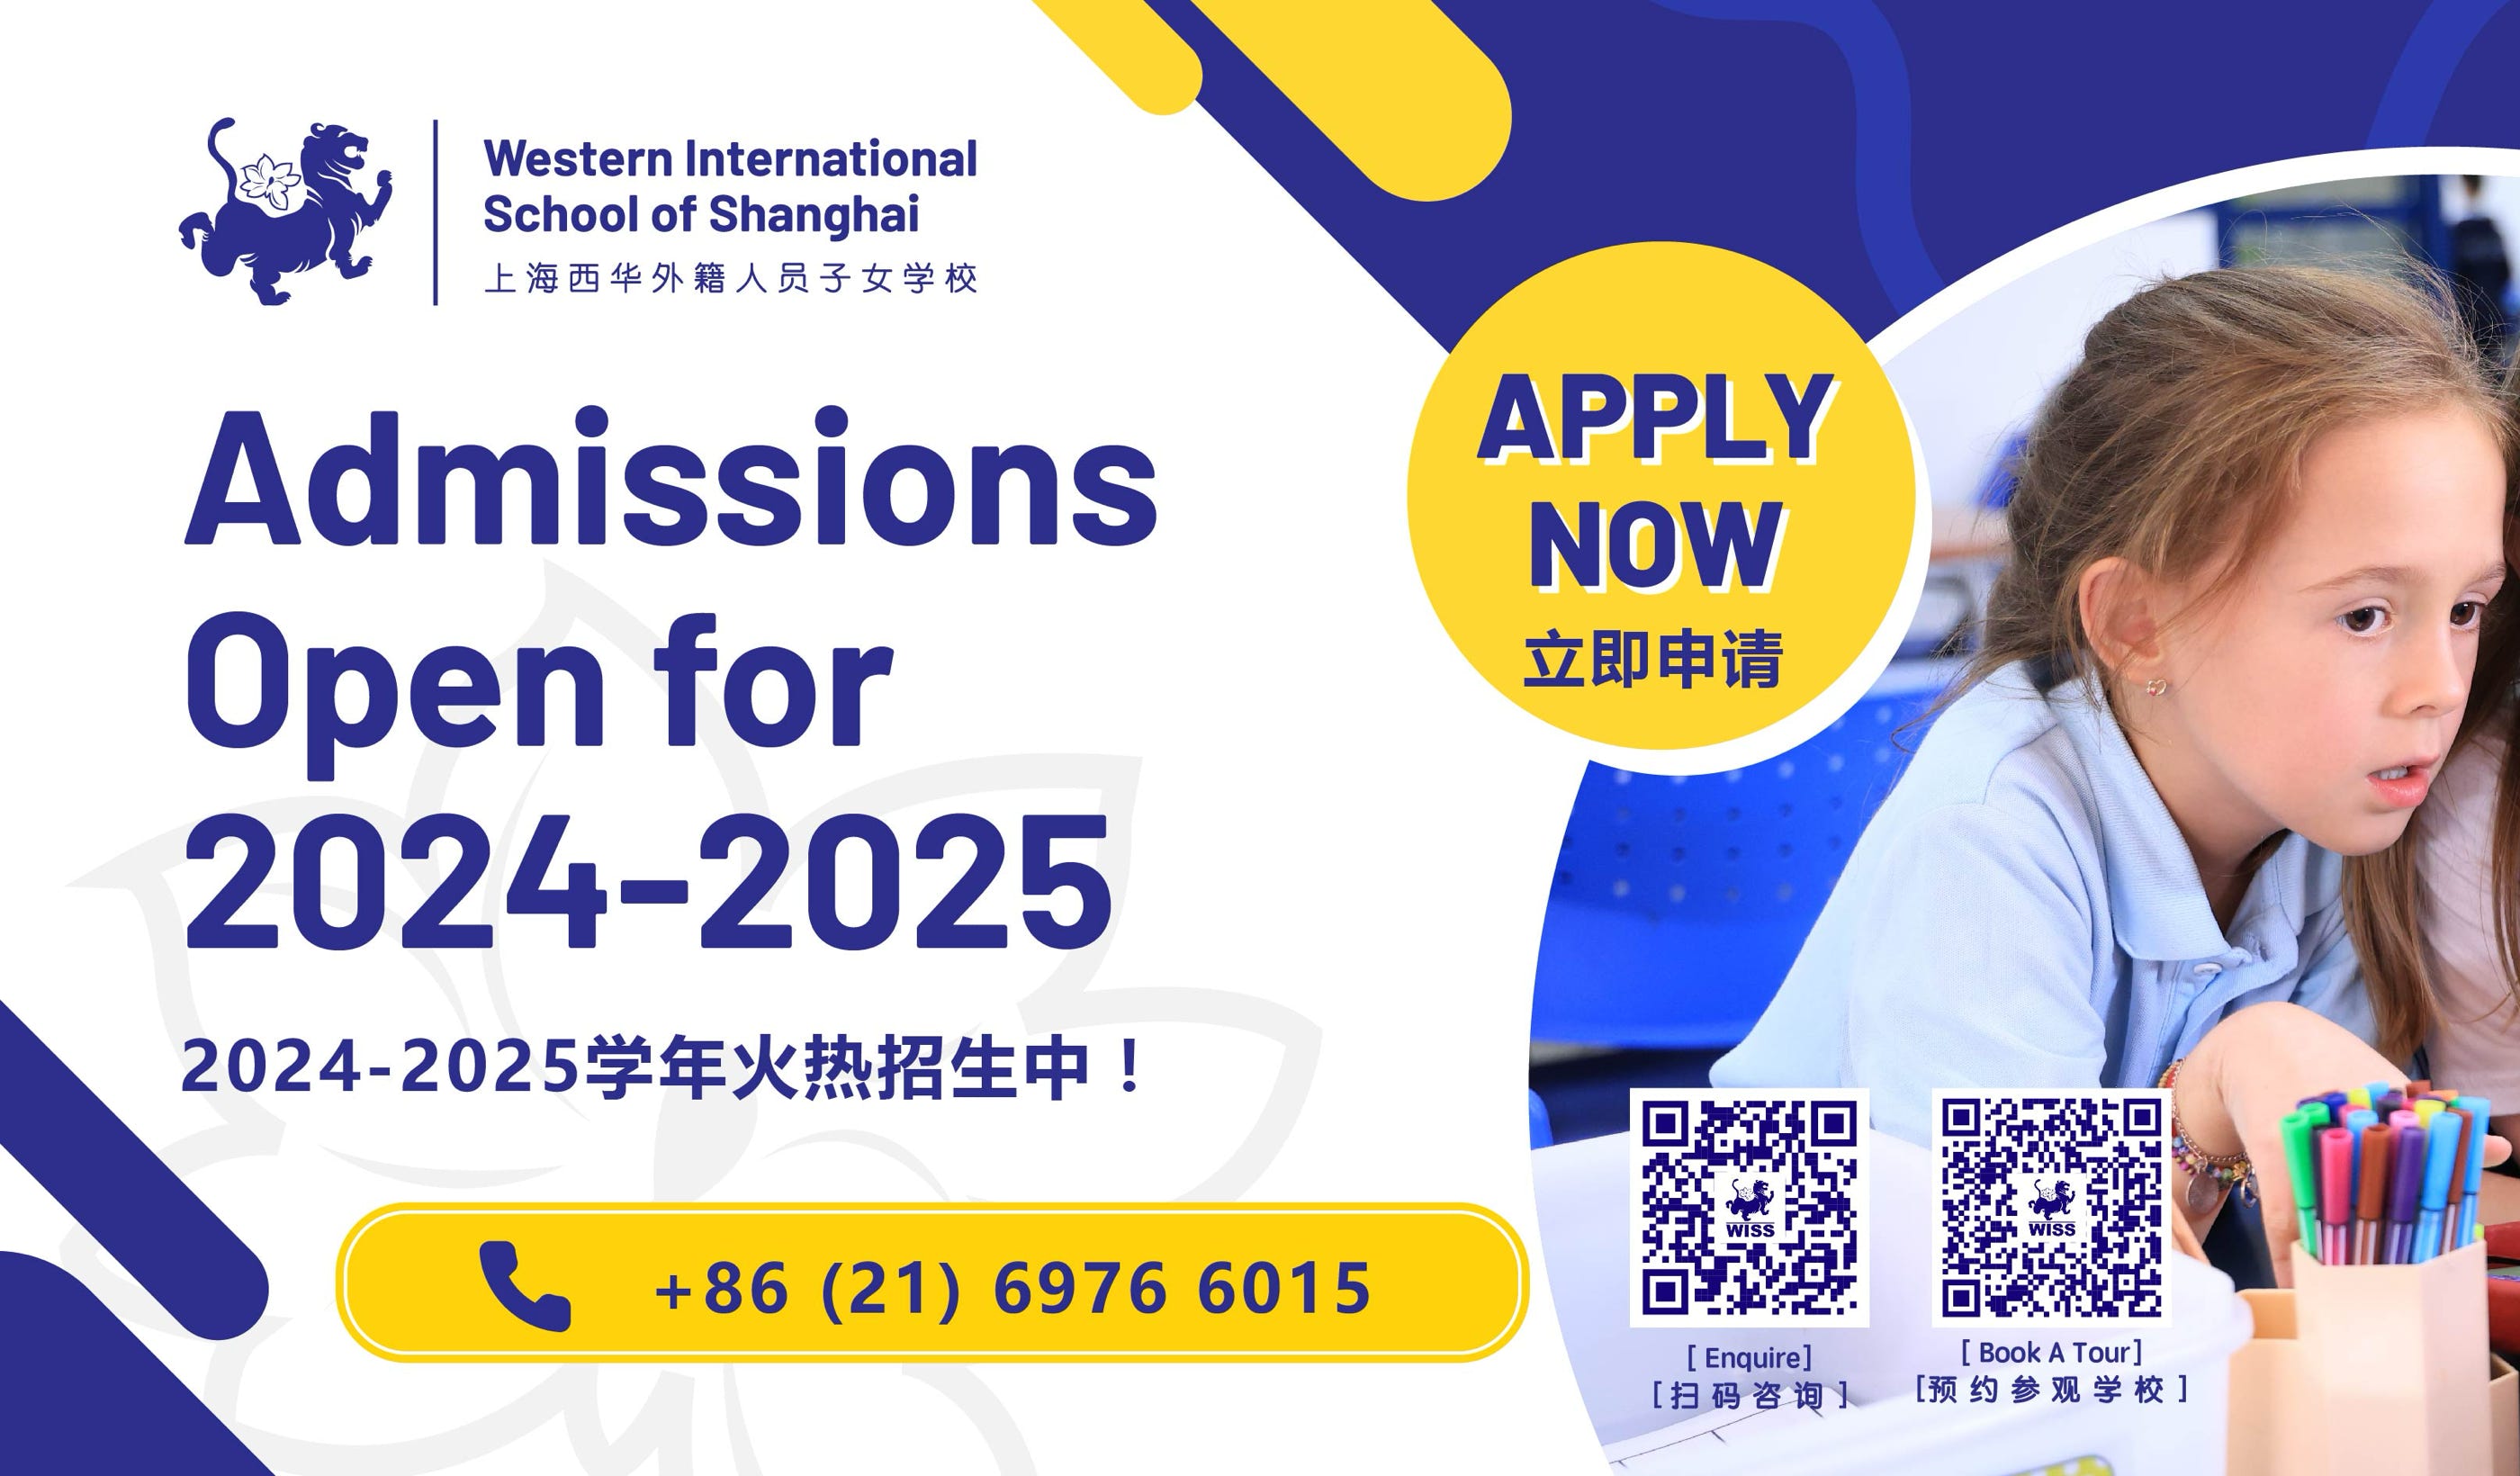 The Western International School of Shanghai (WISS) is excited to announce that applications for the upcoming 2024-2025 academic year are now open! WISS is renowned for its commitment to academic excellence, nurturing creativity, promoting sportsmanship, and fostering a sense of social responsibility. With a rolling admissions policy, we welcome students (aged 2.5 to 18 years old) throughout the school year, ensuring that nobody misses out on this exceptional educational opportunity.